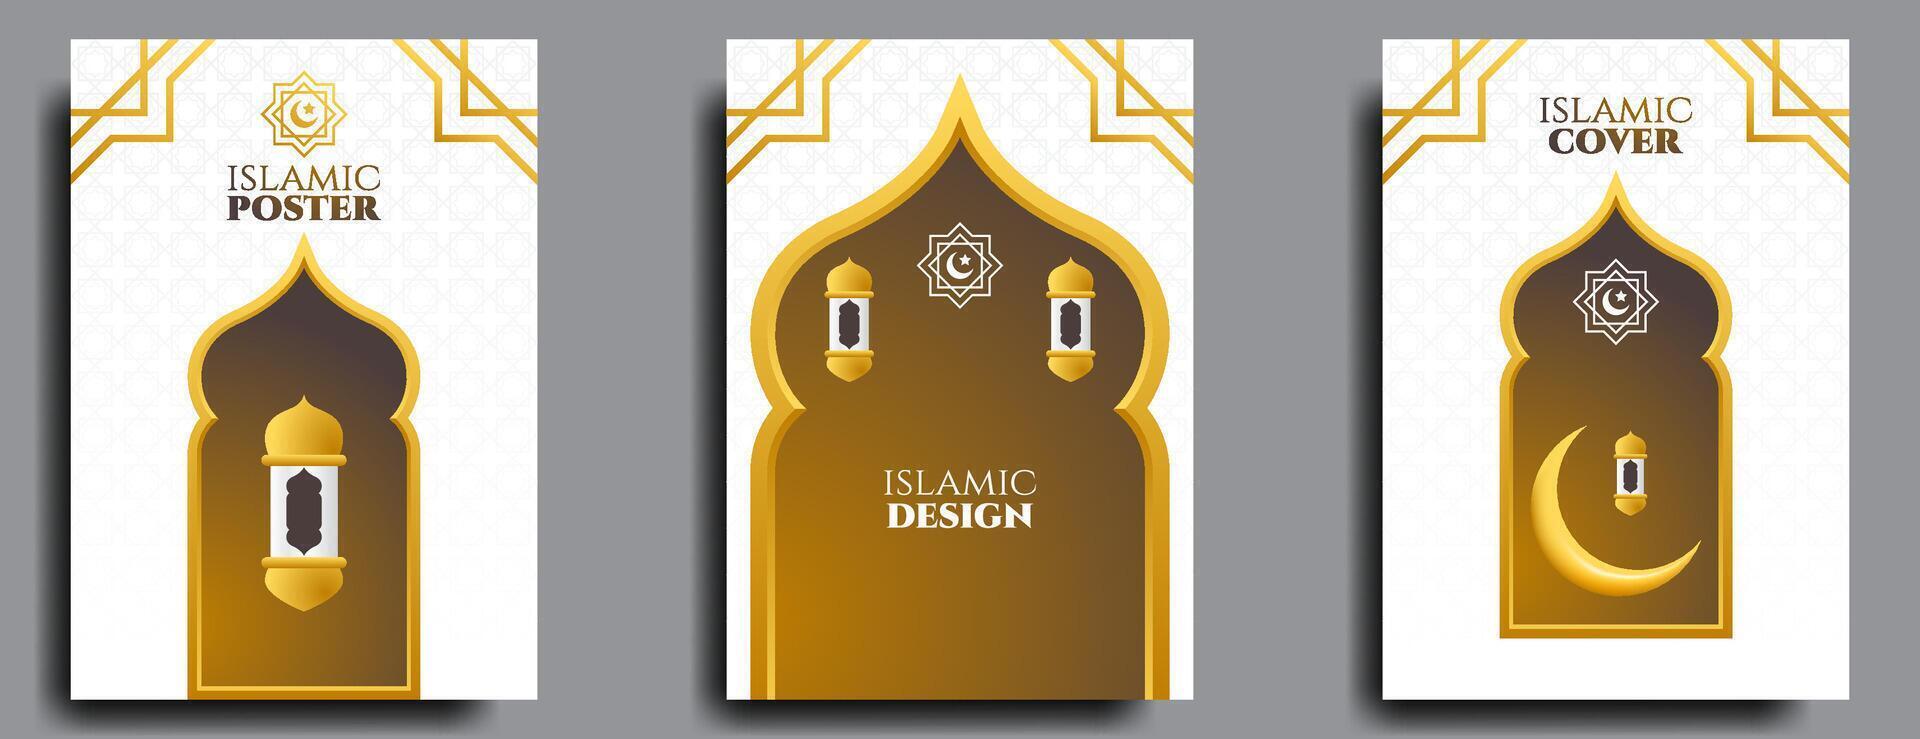 islamic cover or poster design set with gold and white color. vector illustration